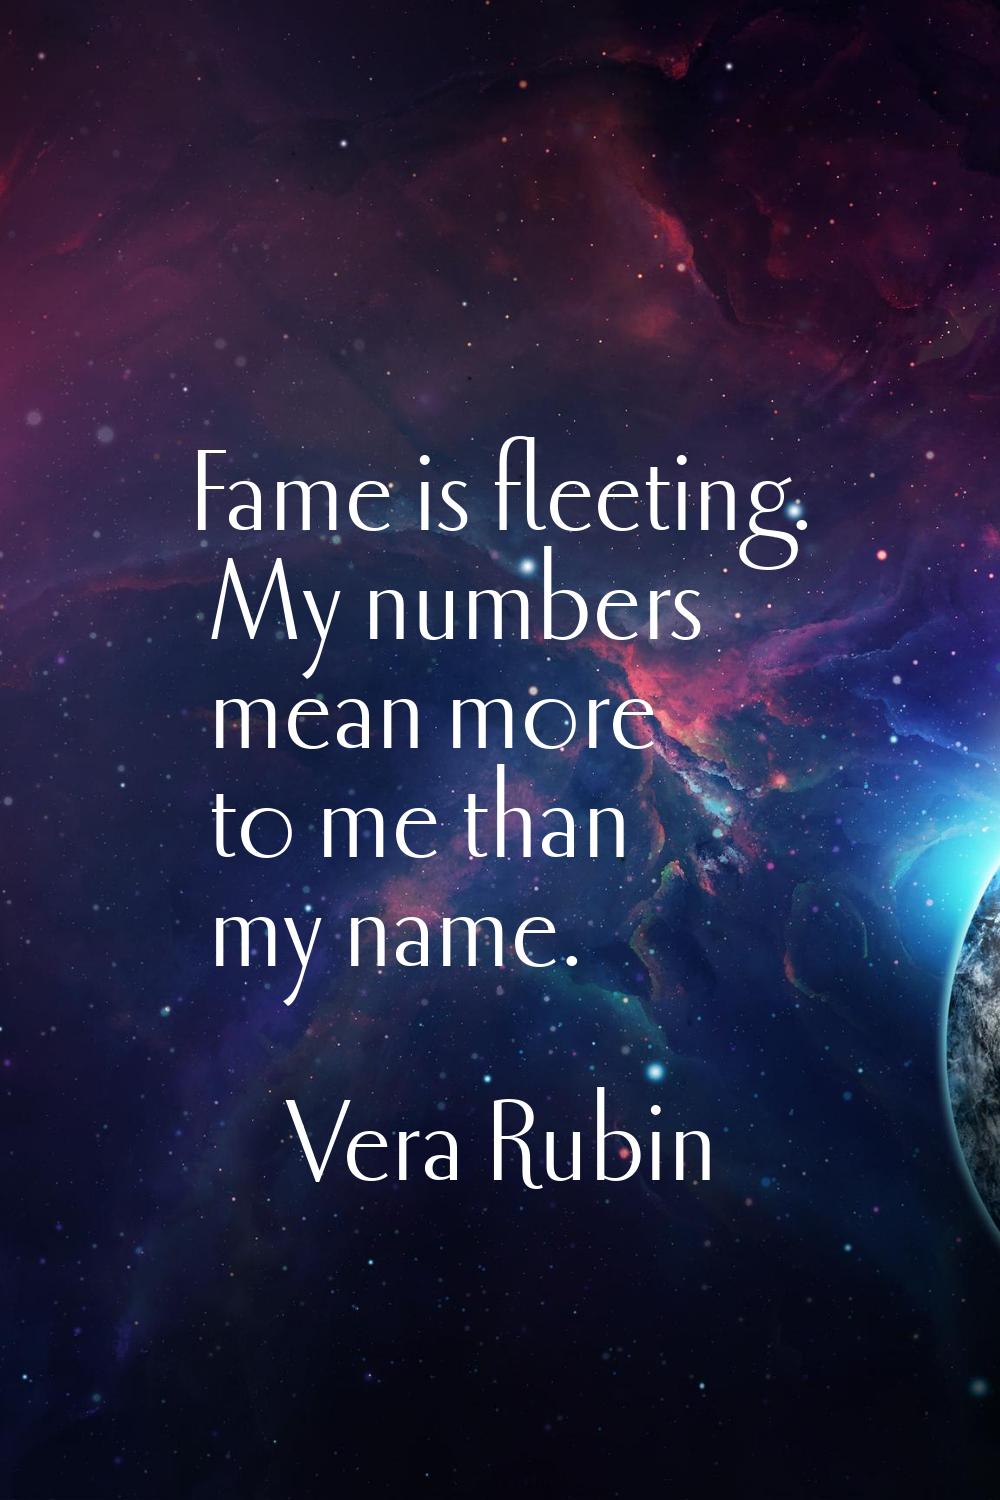 Fame is fleeting. My numbers mean more to me than my name.